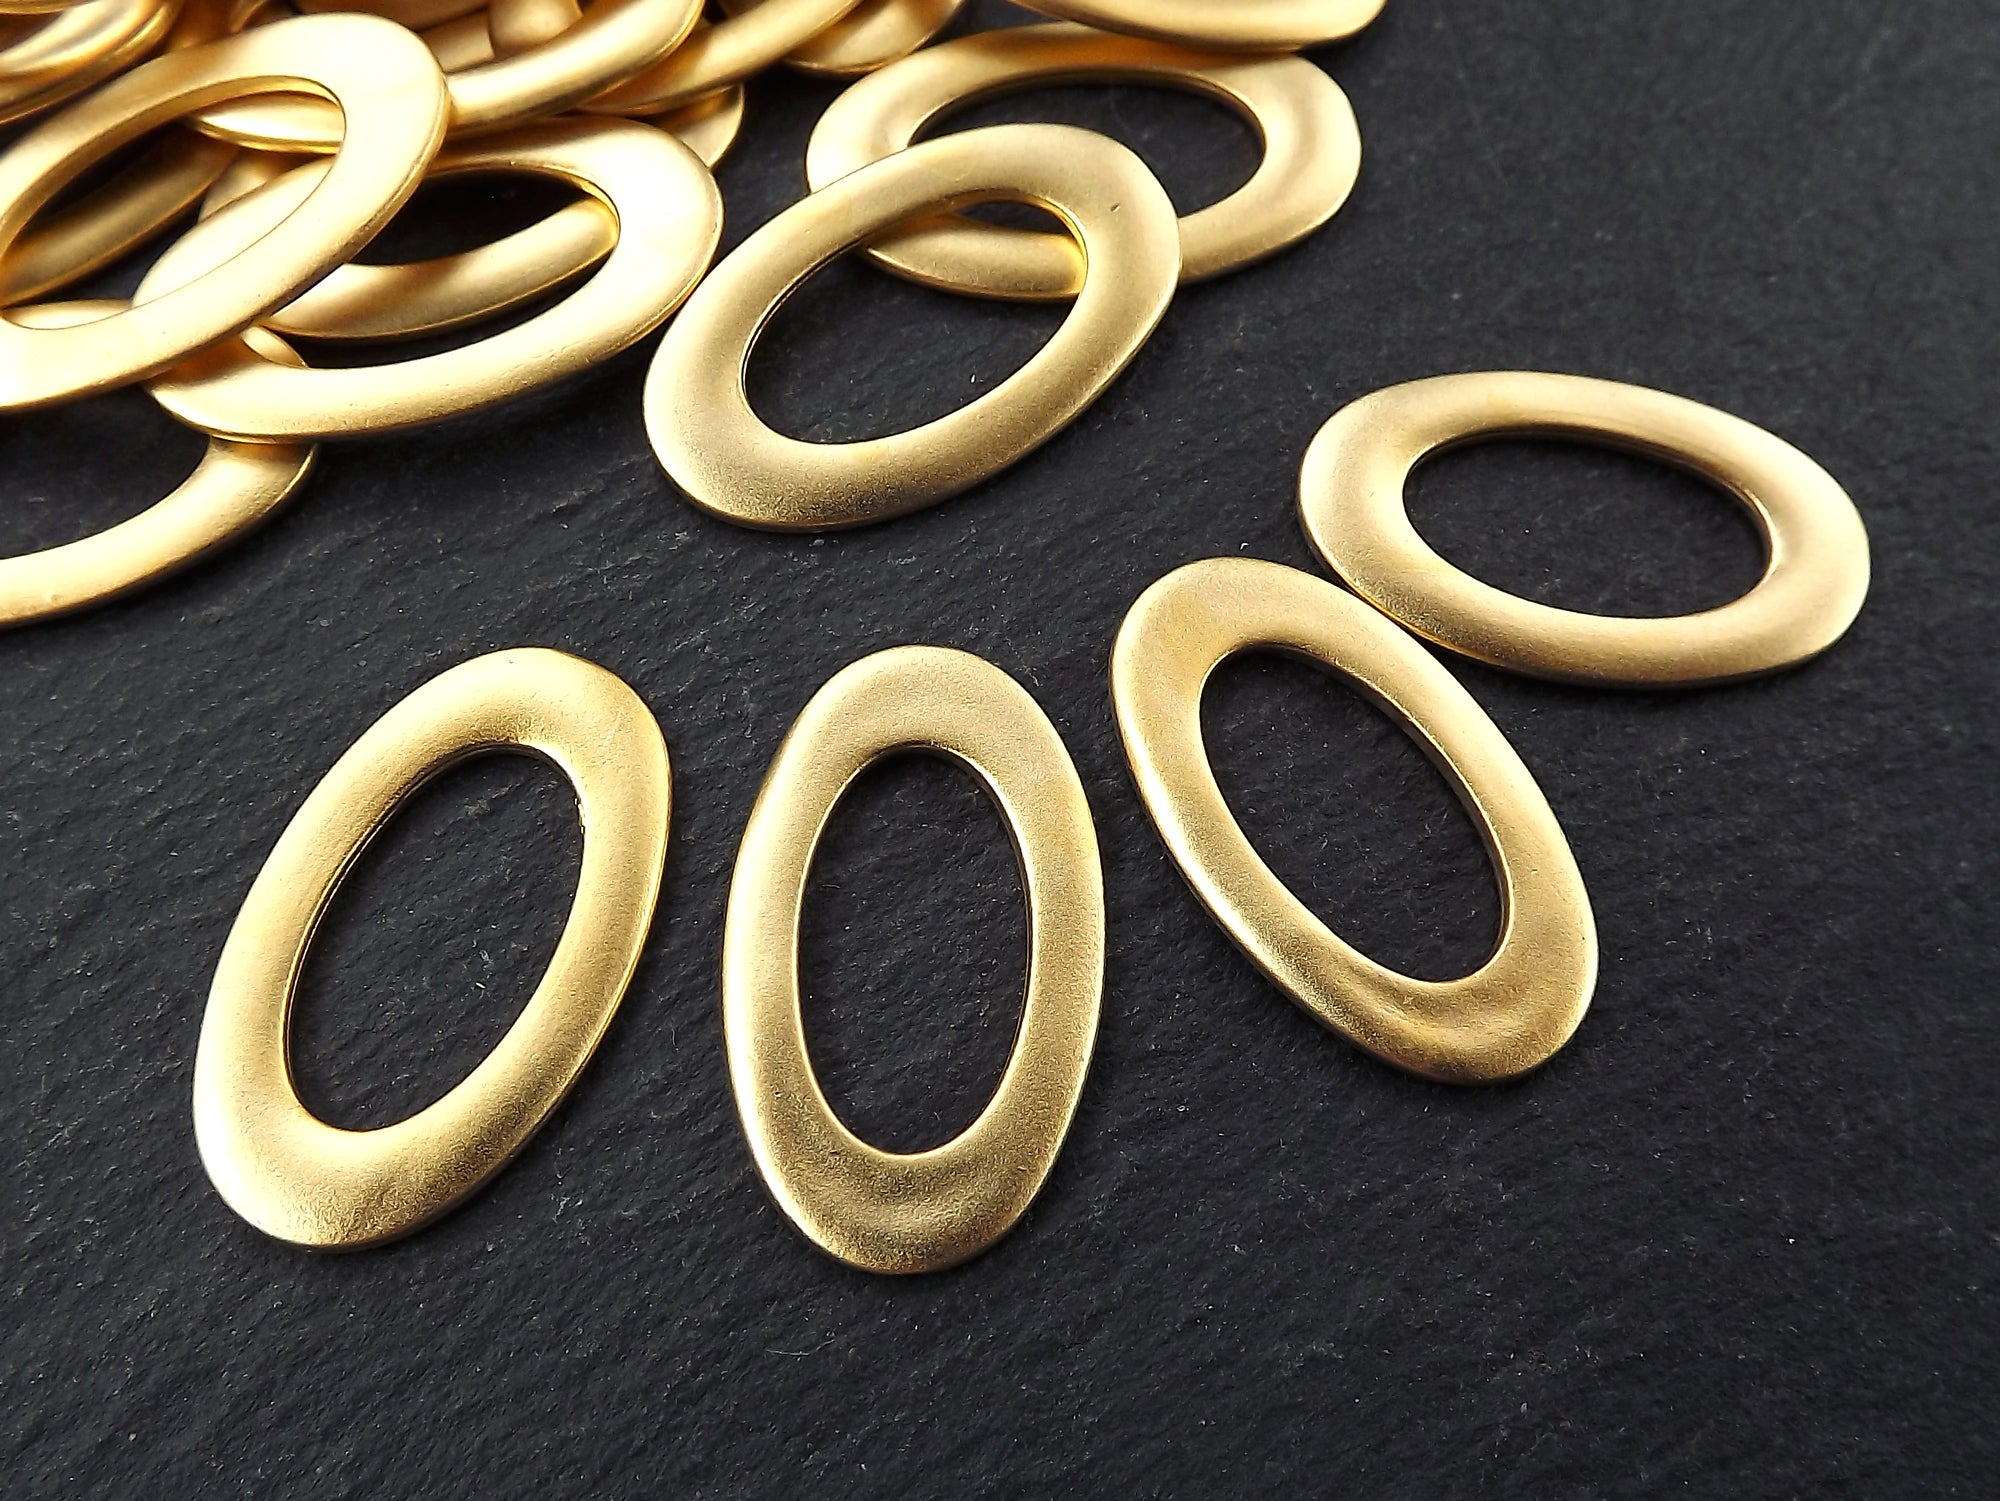 Flat Oval Link Components, Closed Loop, Gold Loop, Gold Oval Finding, 26x15mm, 22k Matte Gold, 5pc